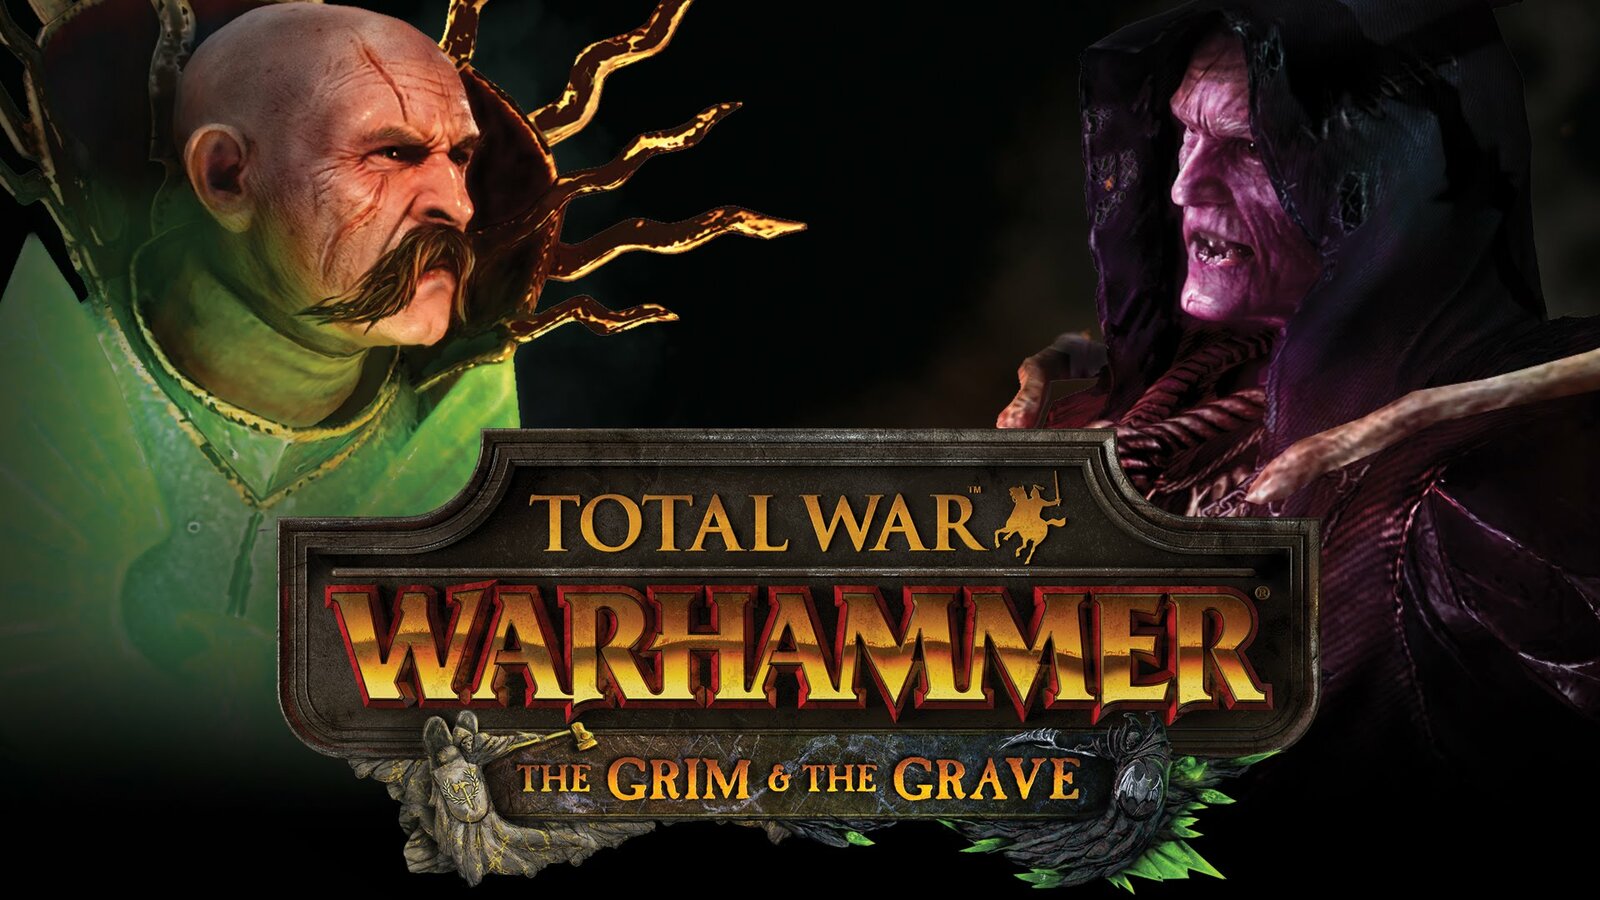 Total War: Warhammer - The Grim and the Grave